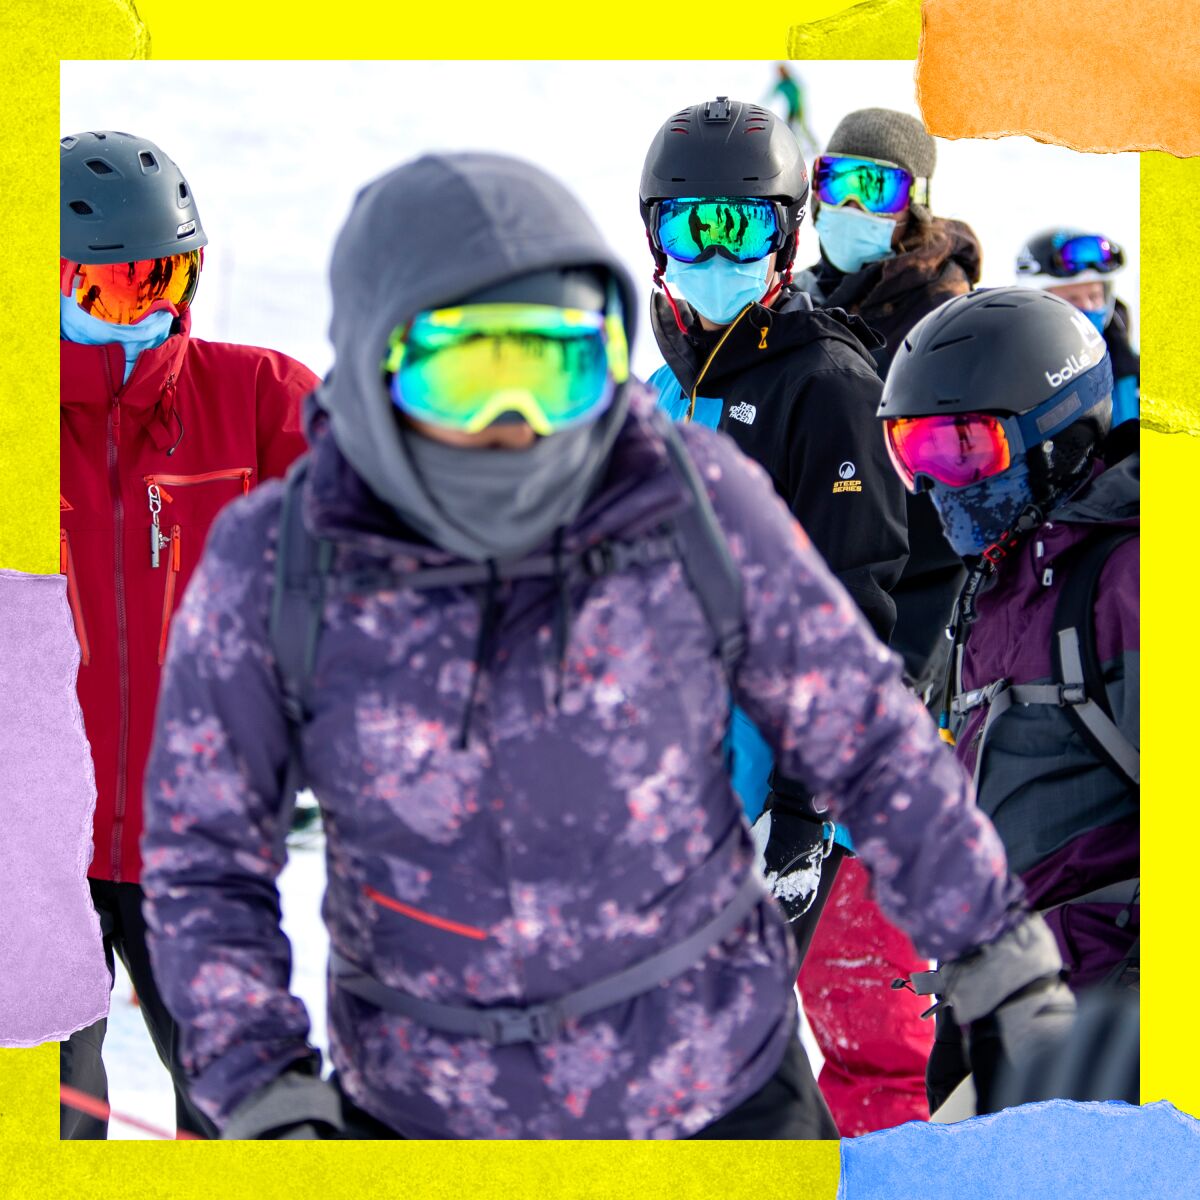 A crowd of people in ski gear, helmets and reflective goggles.